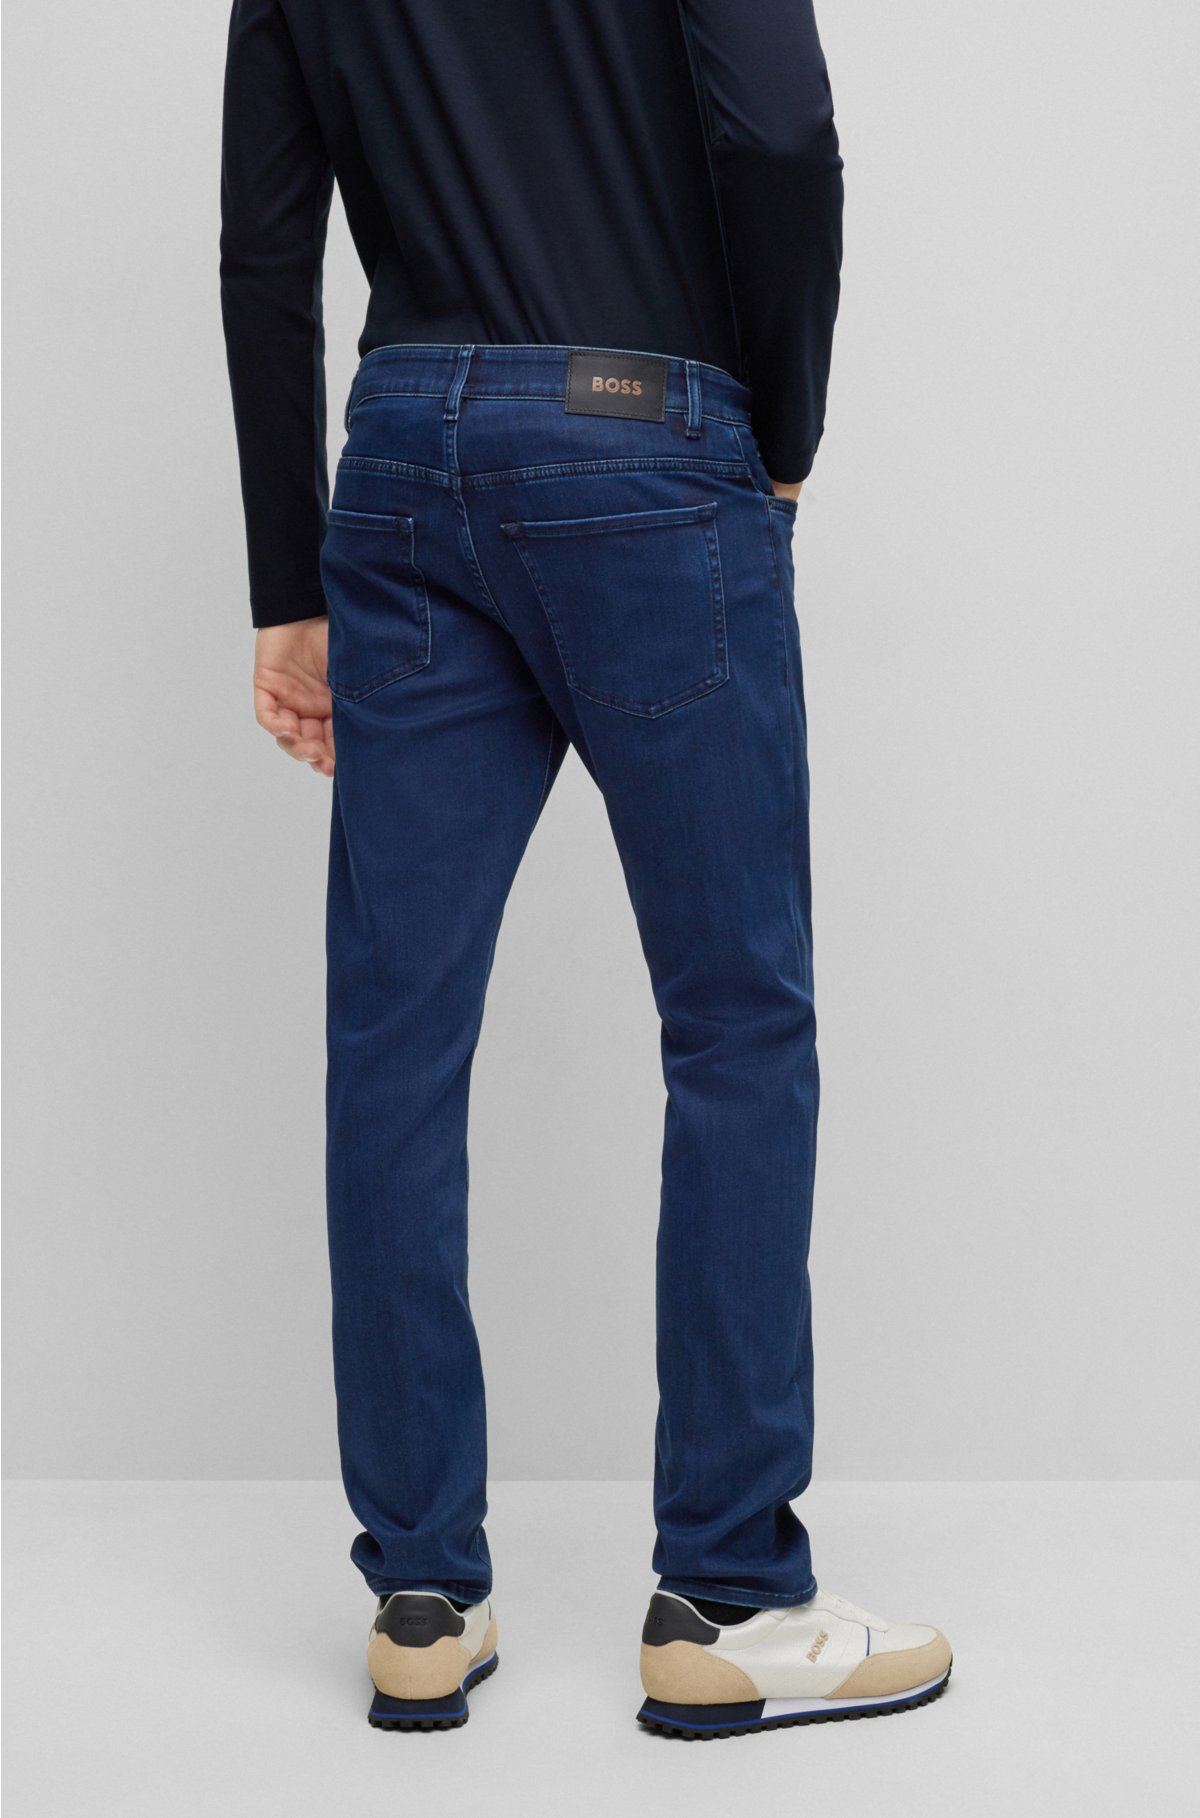 BOSS - denim satin-touch Slim-fit jeans blue in